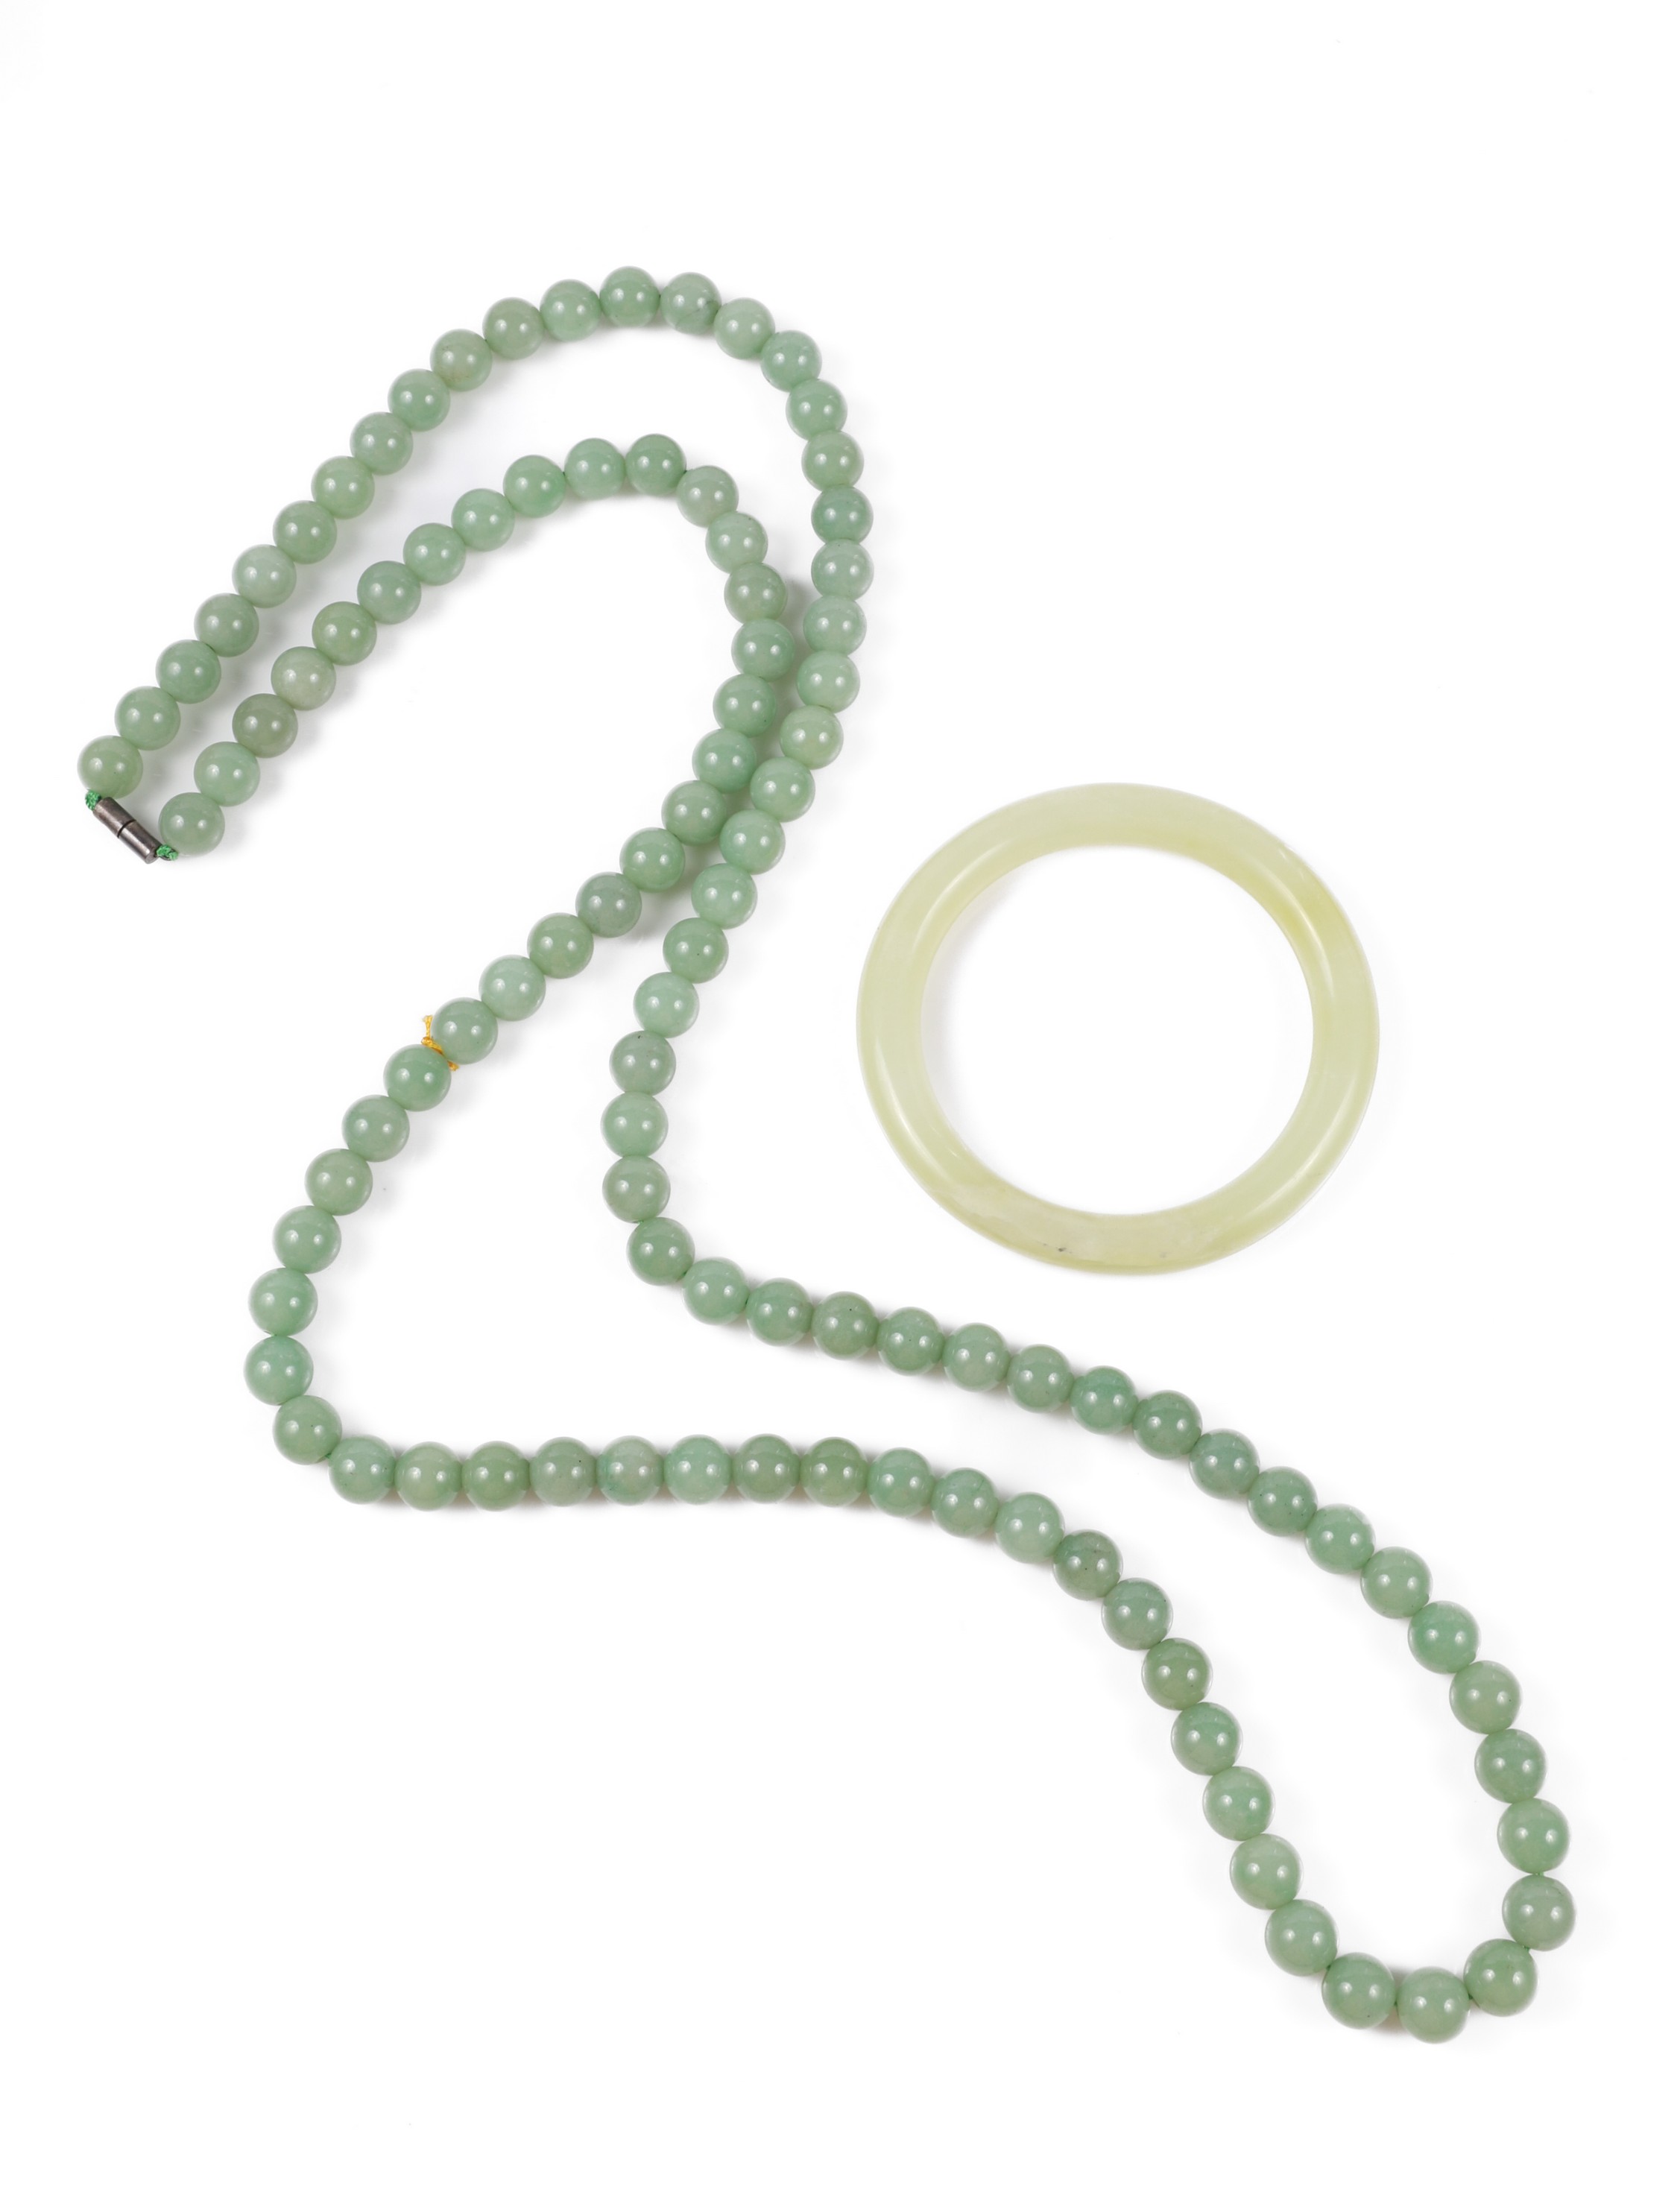 Jade style necklace and bangle, 40L